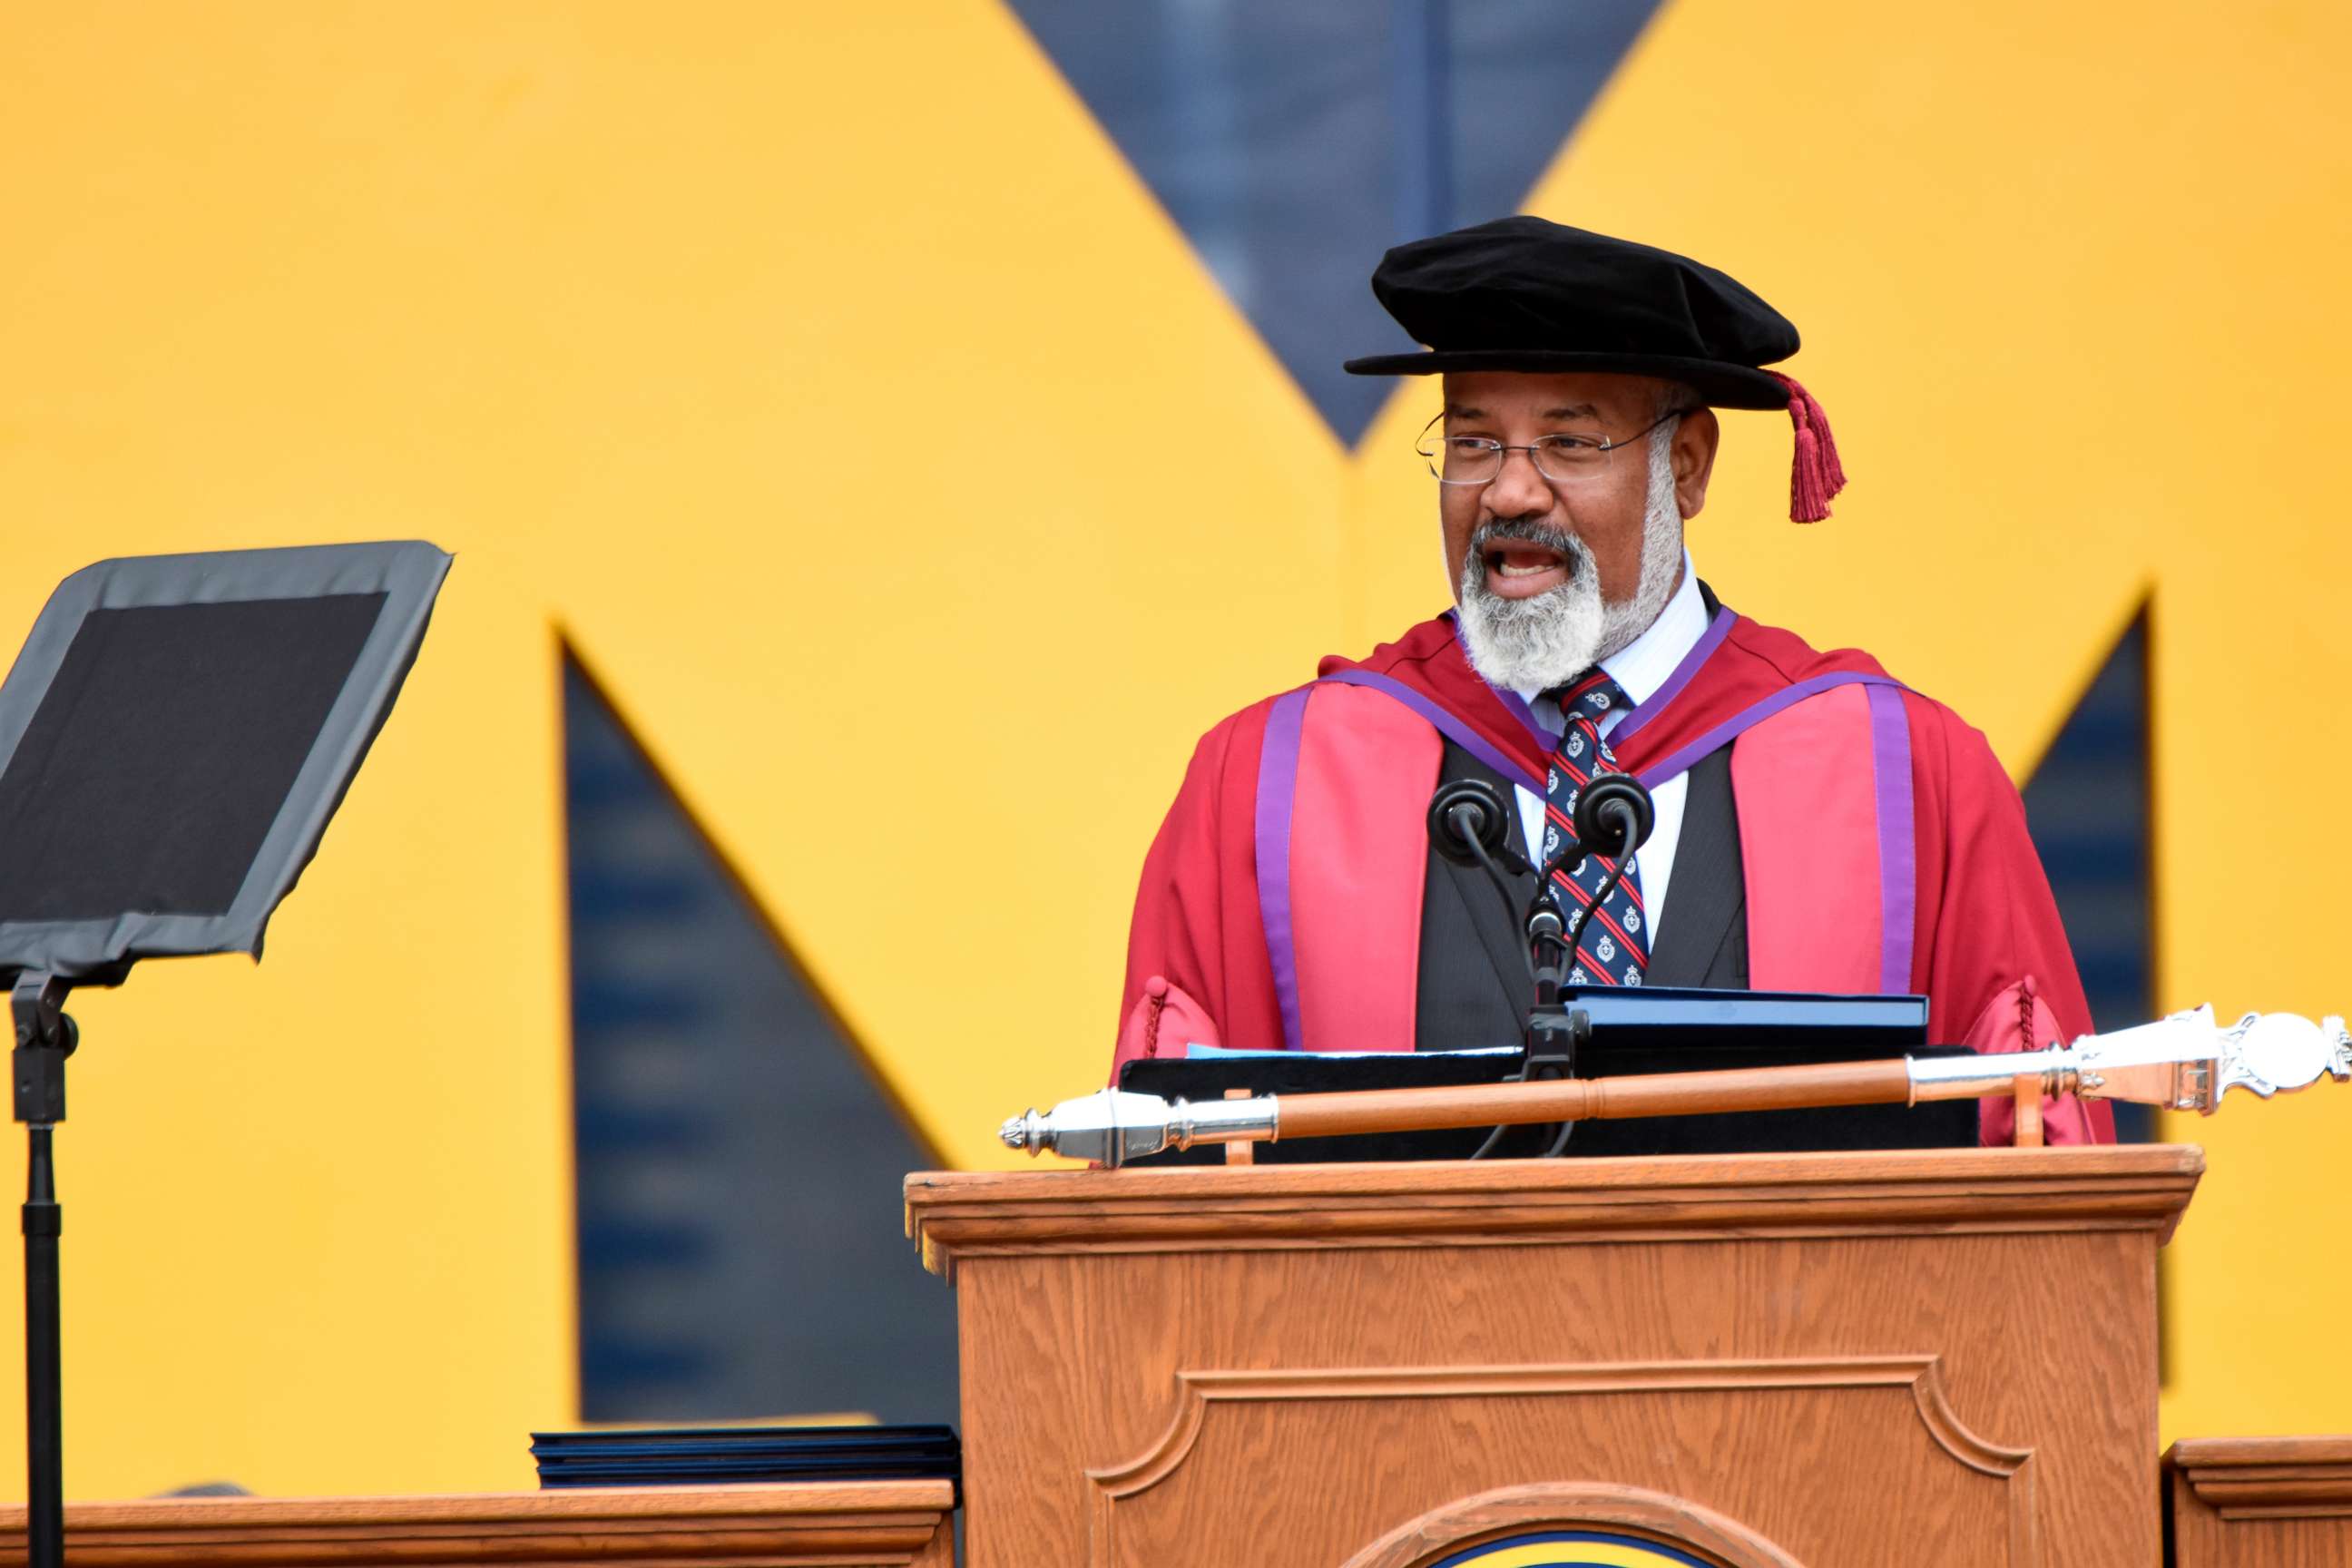 PHOTO: University of Michigan Provost Martin Philbert speaks during commencement exercises in Ann Arbor, Mich., May 4, 2019.